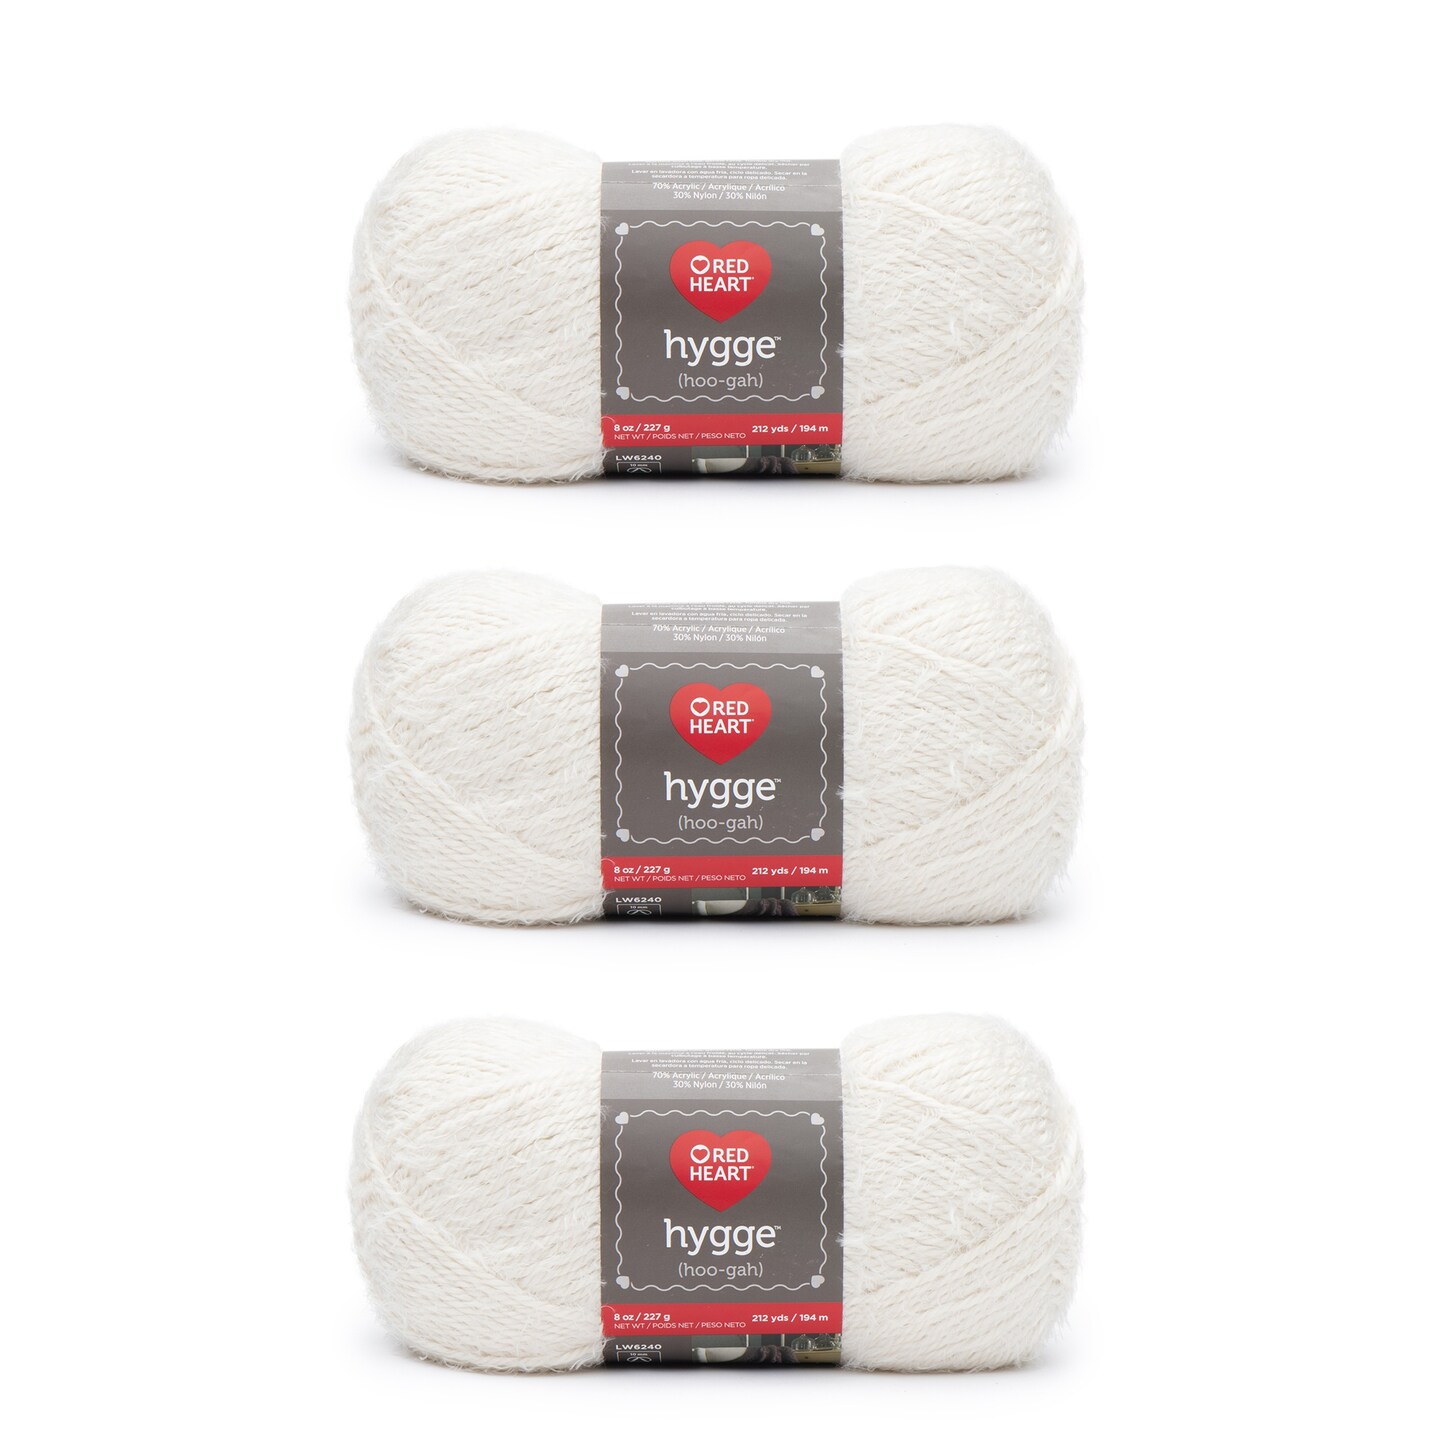 Red Heart Hygge Pearl Yarn 3 Pack of 227g/8oz - Acrylic Blend - 5 Bulky - 212 Yards - |